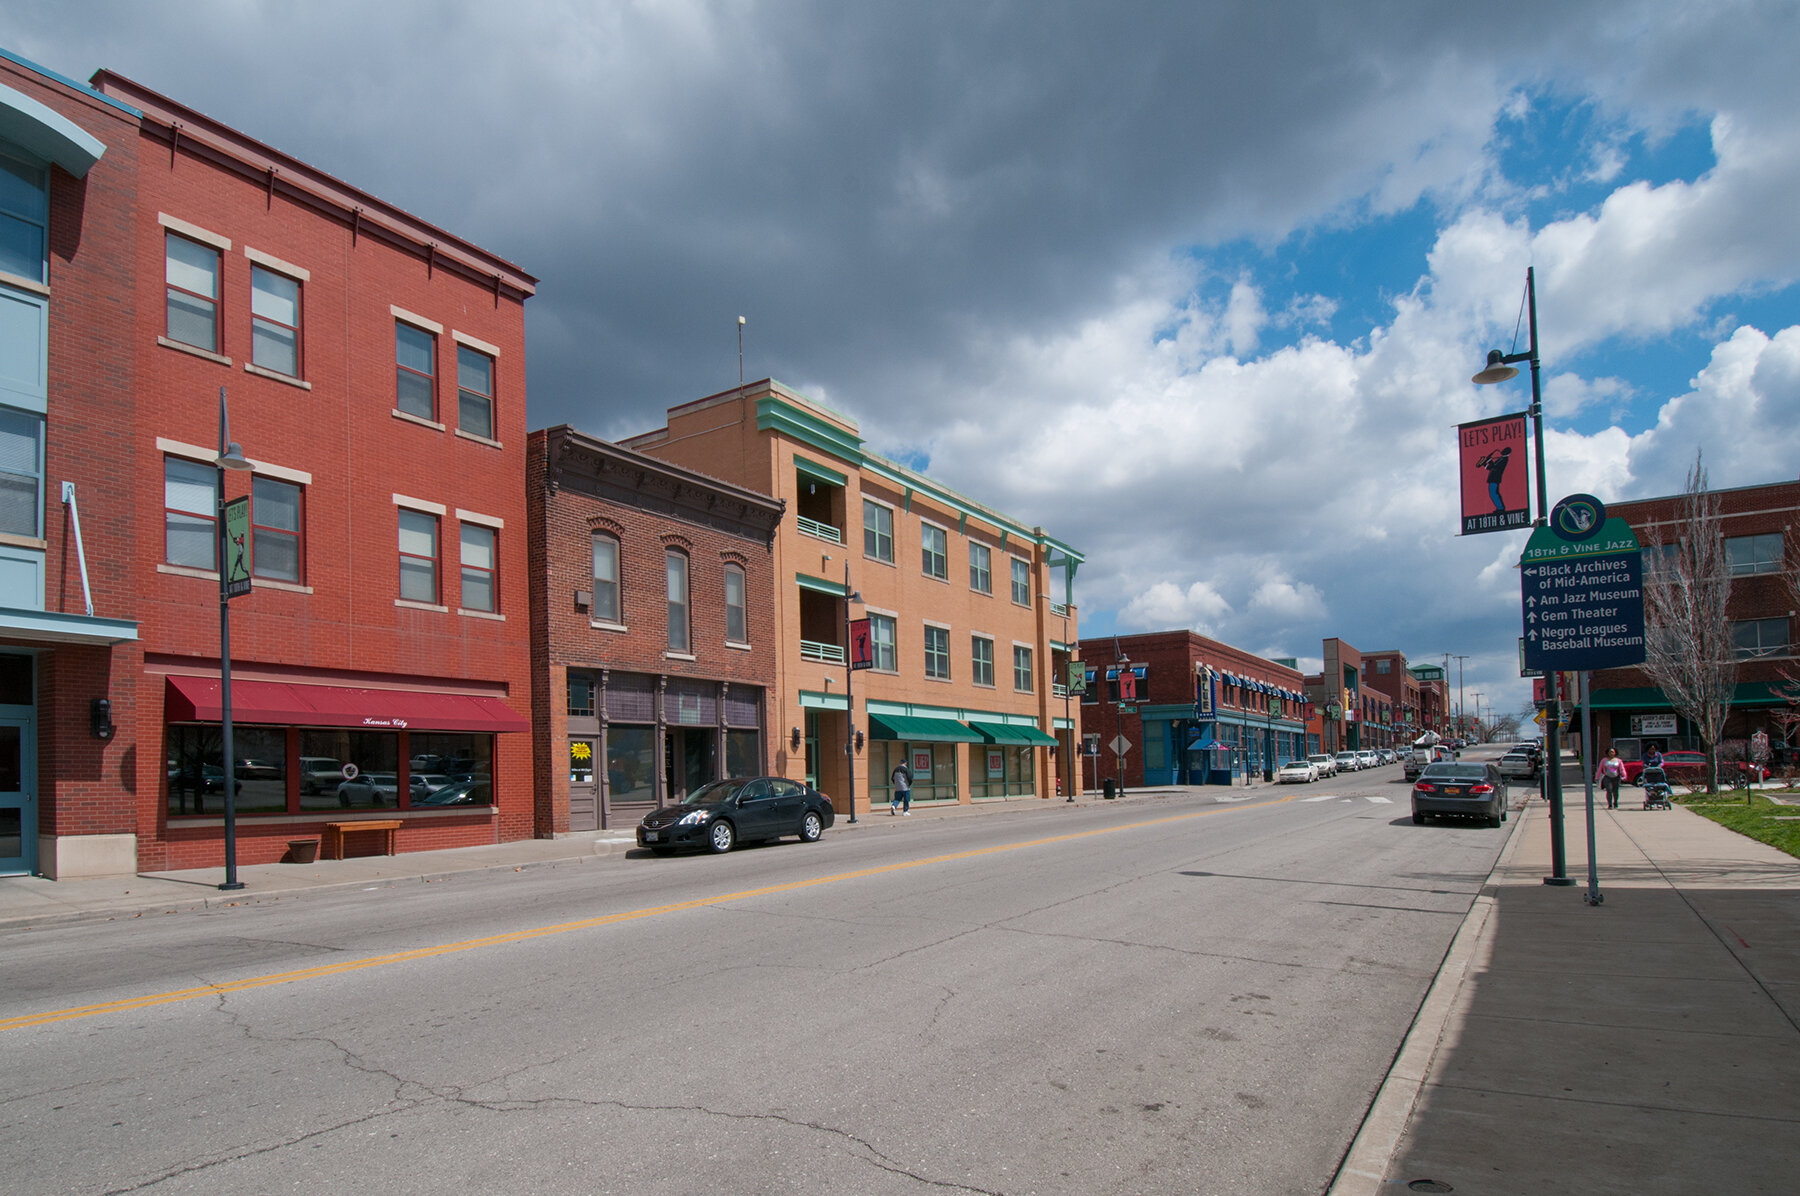 Visions of America: Discovering 18th & Vine in Kansas City